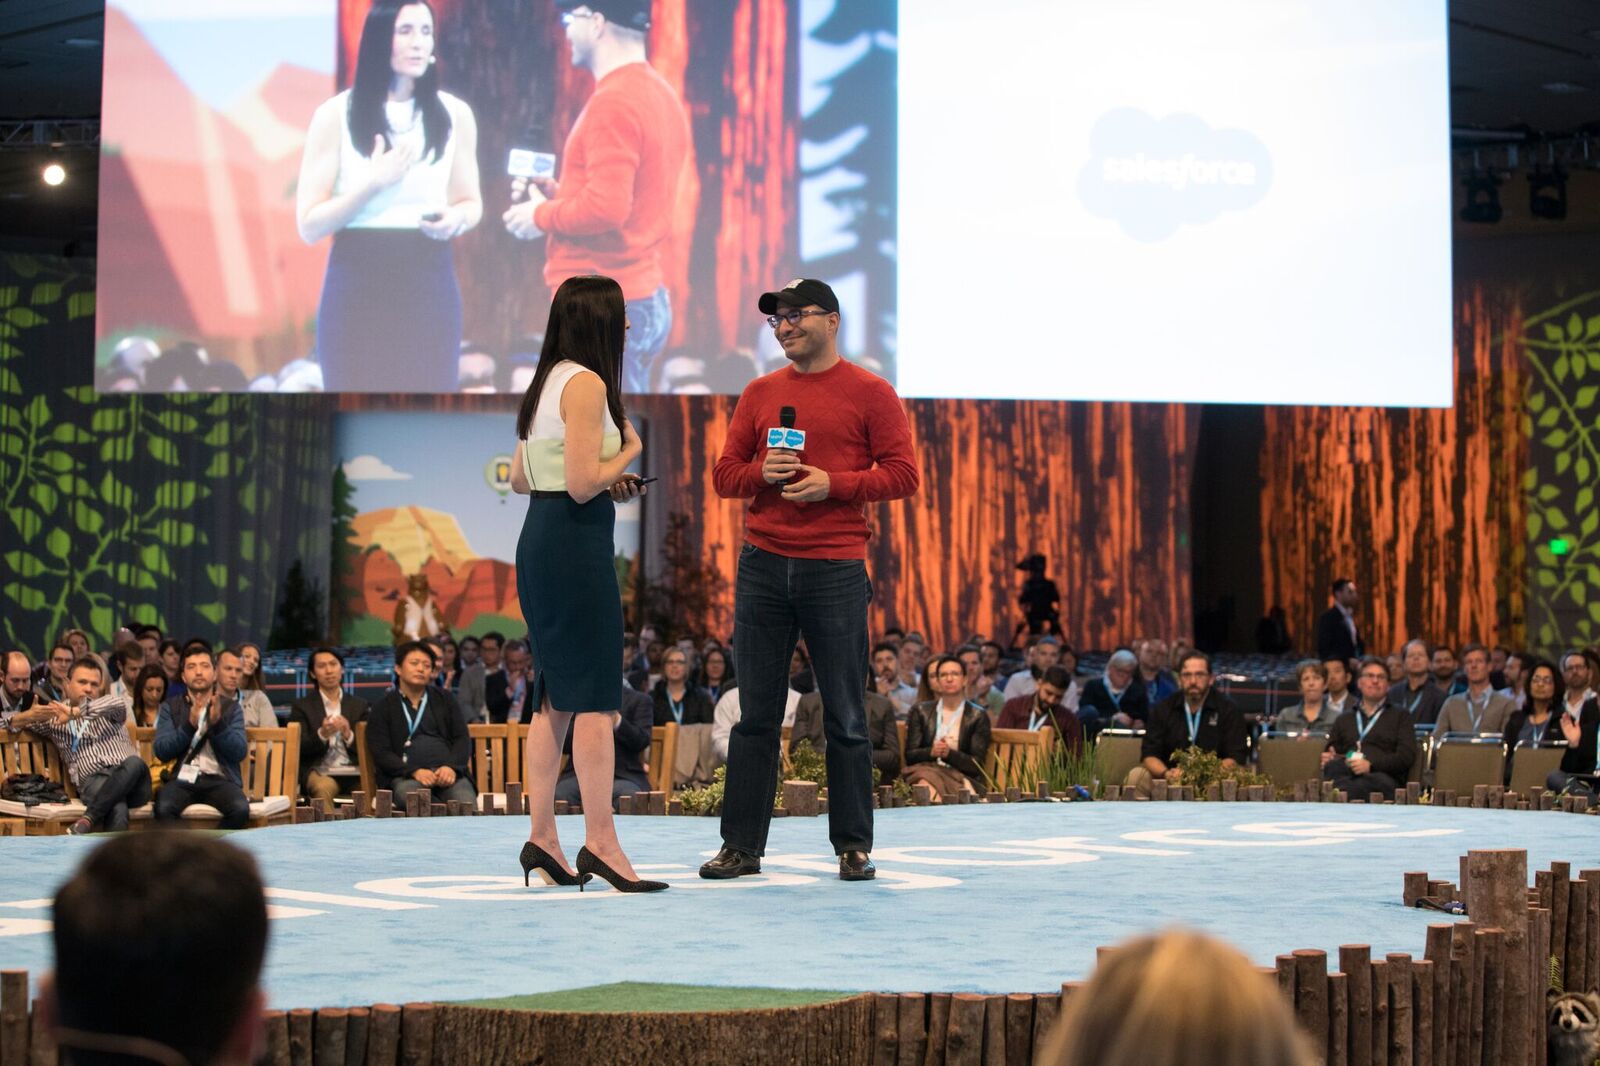 14 Pieces of Advice for SMBs from Dreamforce